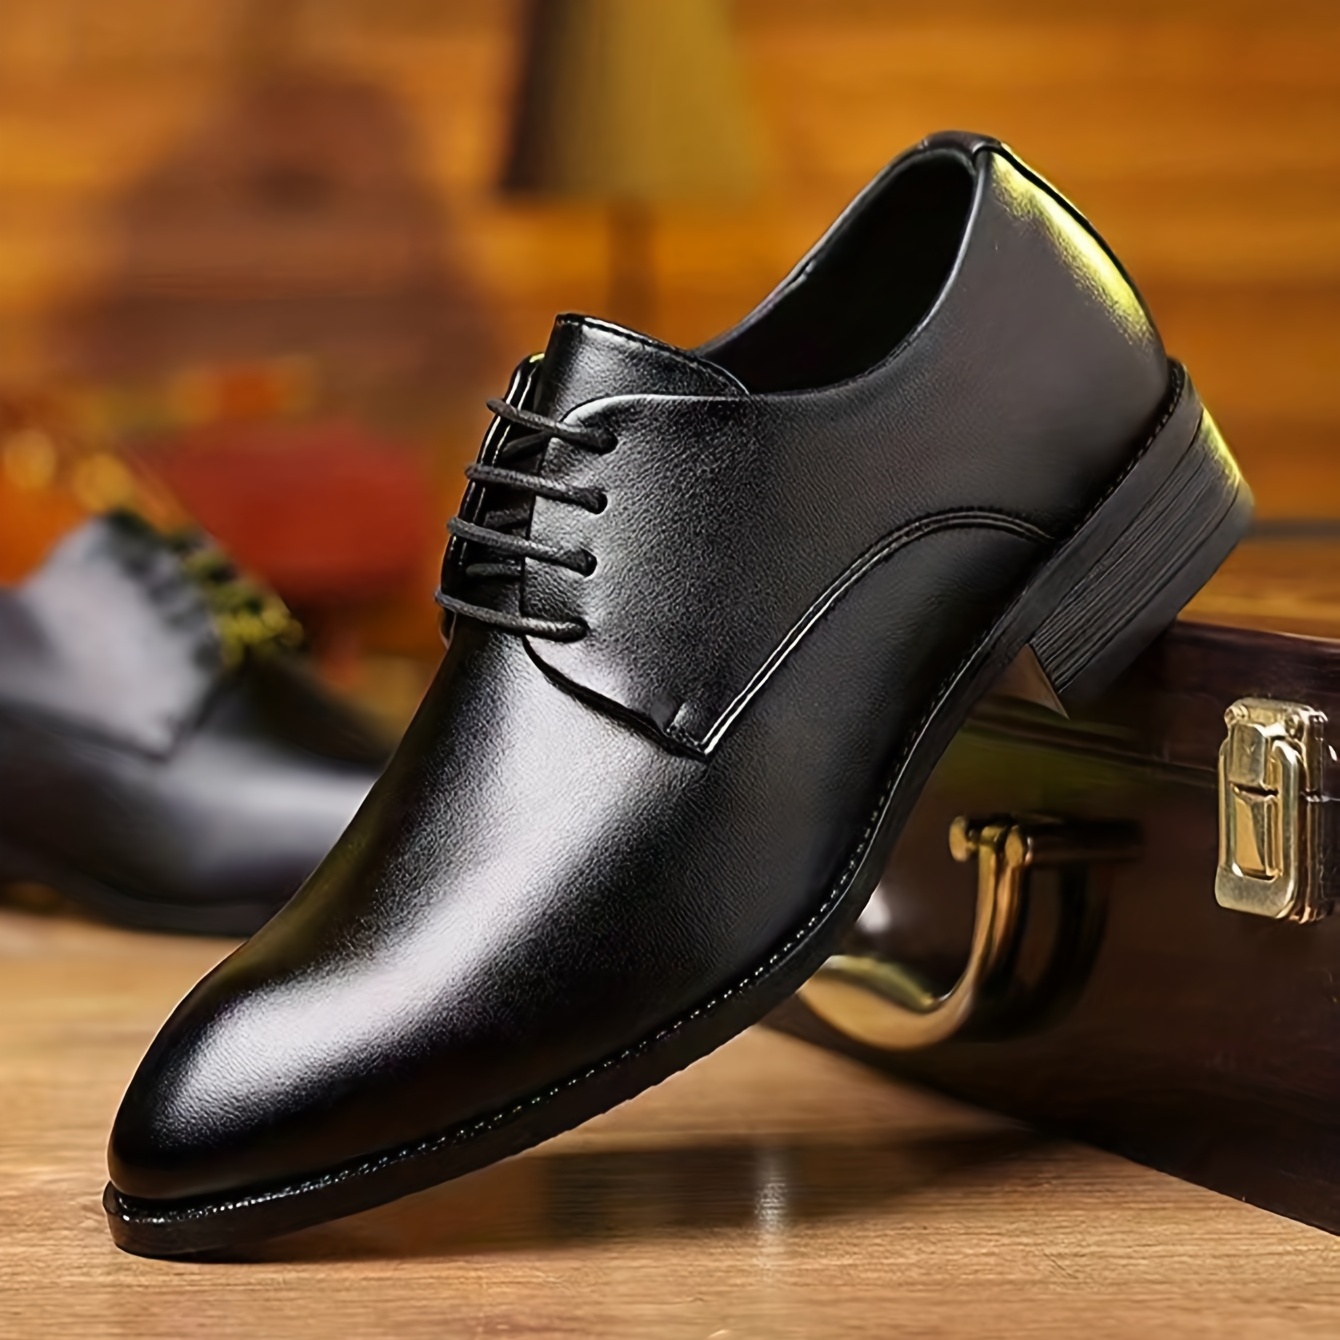 Luxury Italian Mens Oxford Shoes Fashion Plaid Print Genuine Leather Black  White Lace Up Wedding Office Suit Dress Shoes for Men - AliExpress